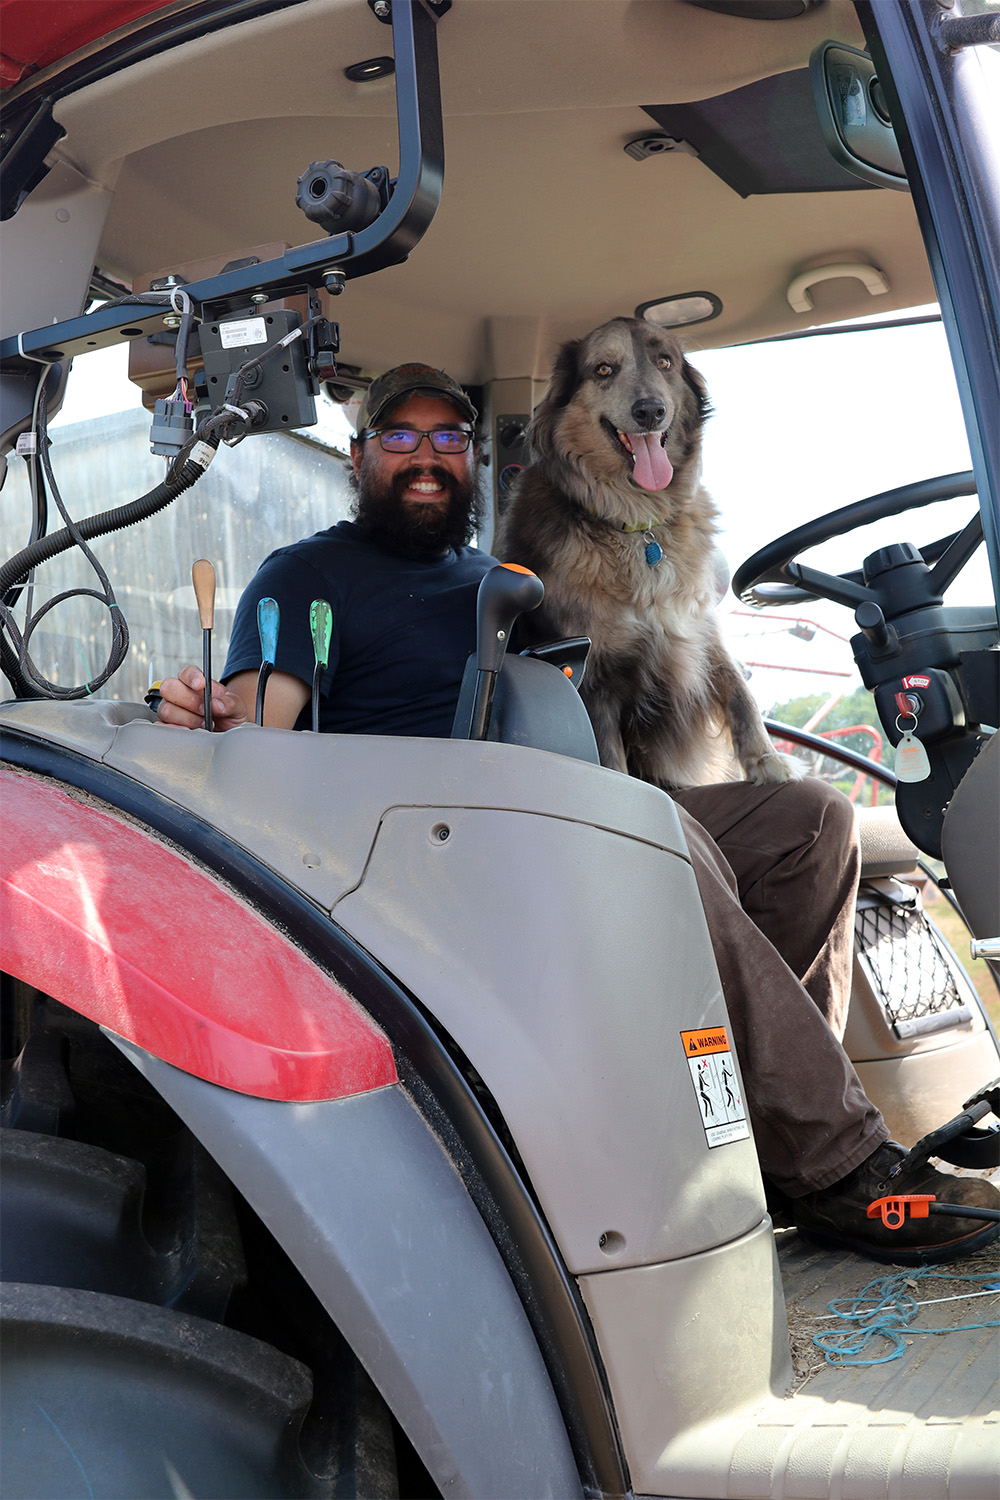 A photo of a white male with a blue shirt, brown pants and a hat sitting in a tractor cab next to a grey, white and brown dog.